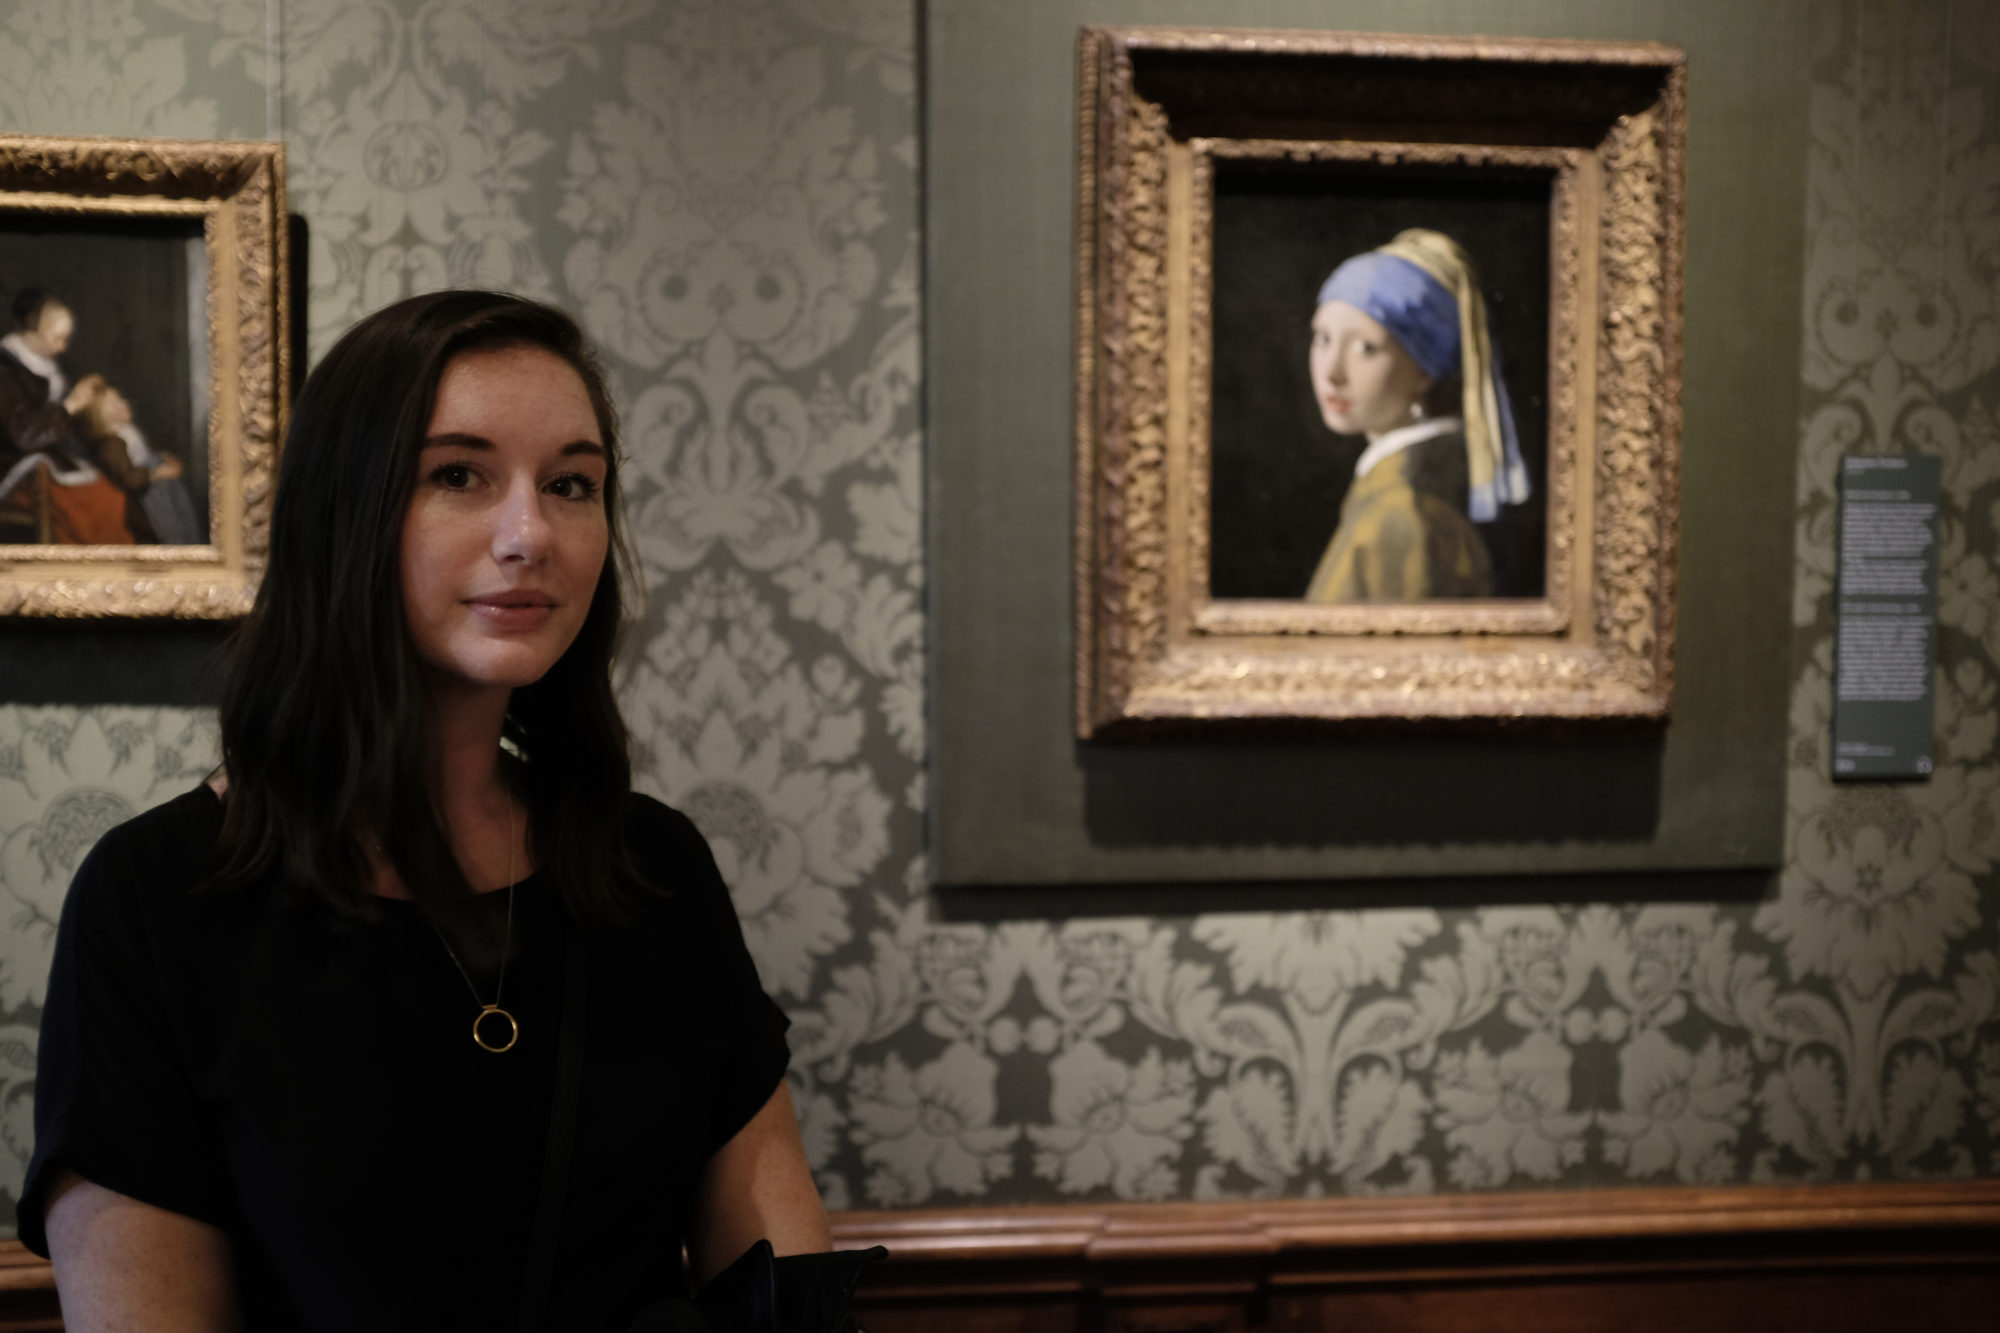 Alyssa stands next to The Girl with a Pearl Earring